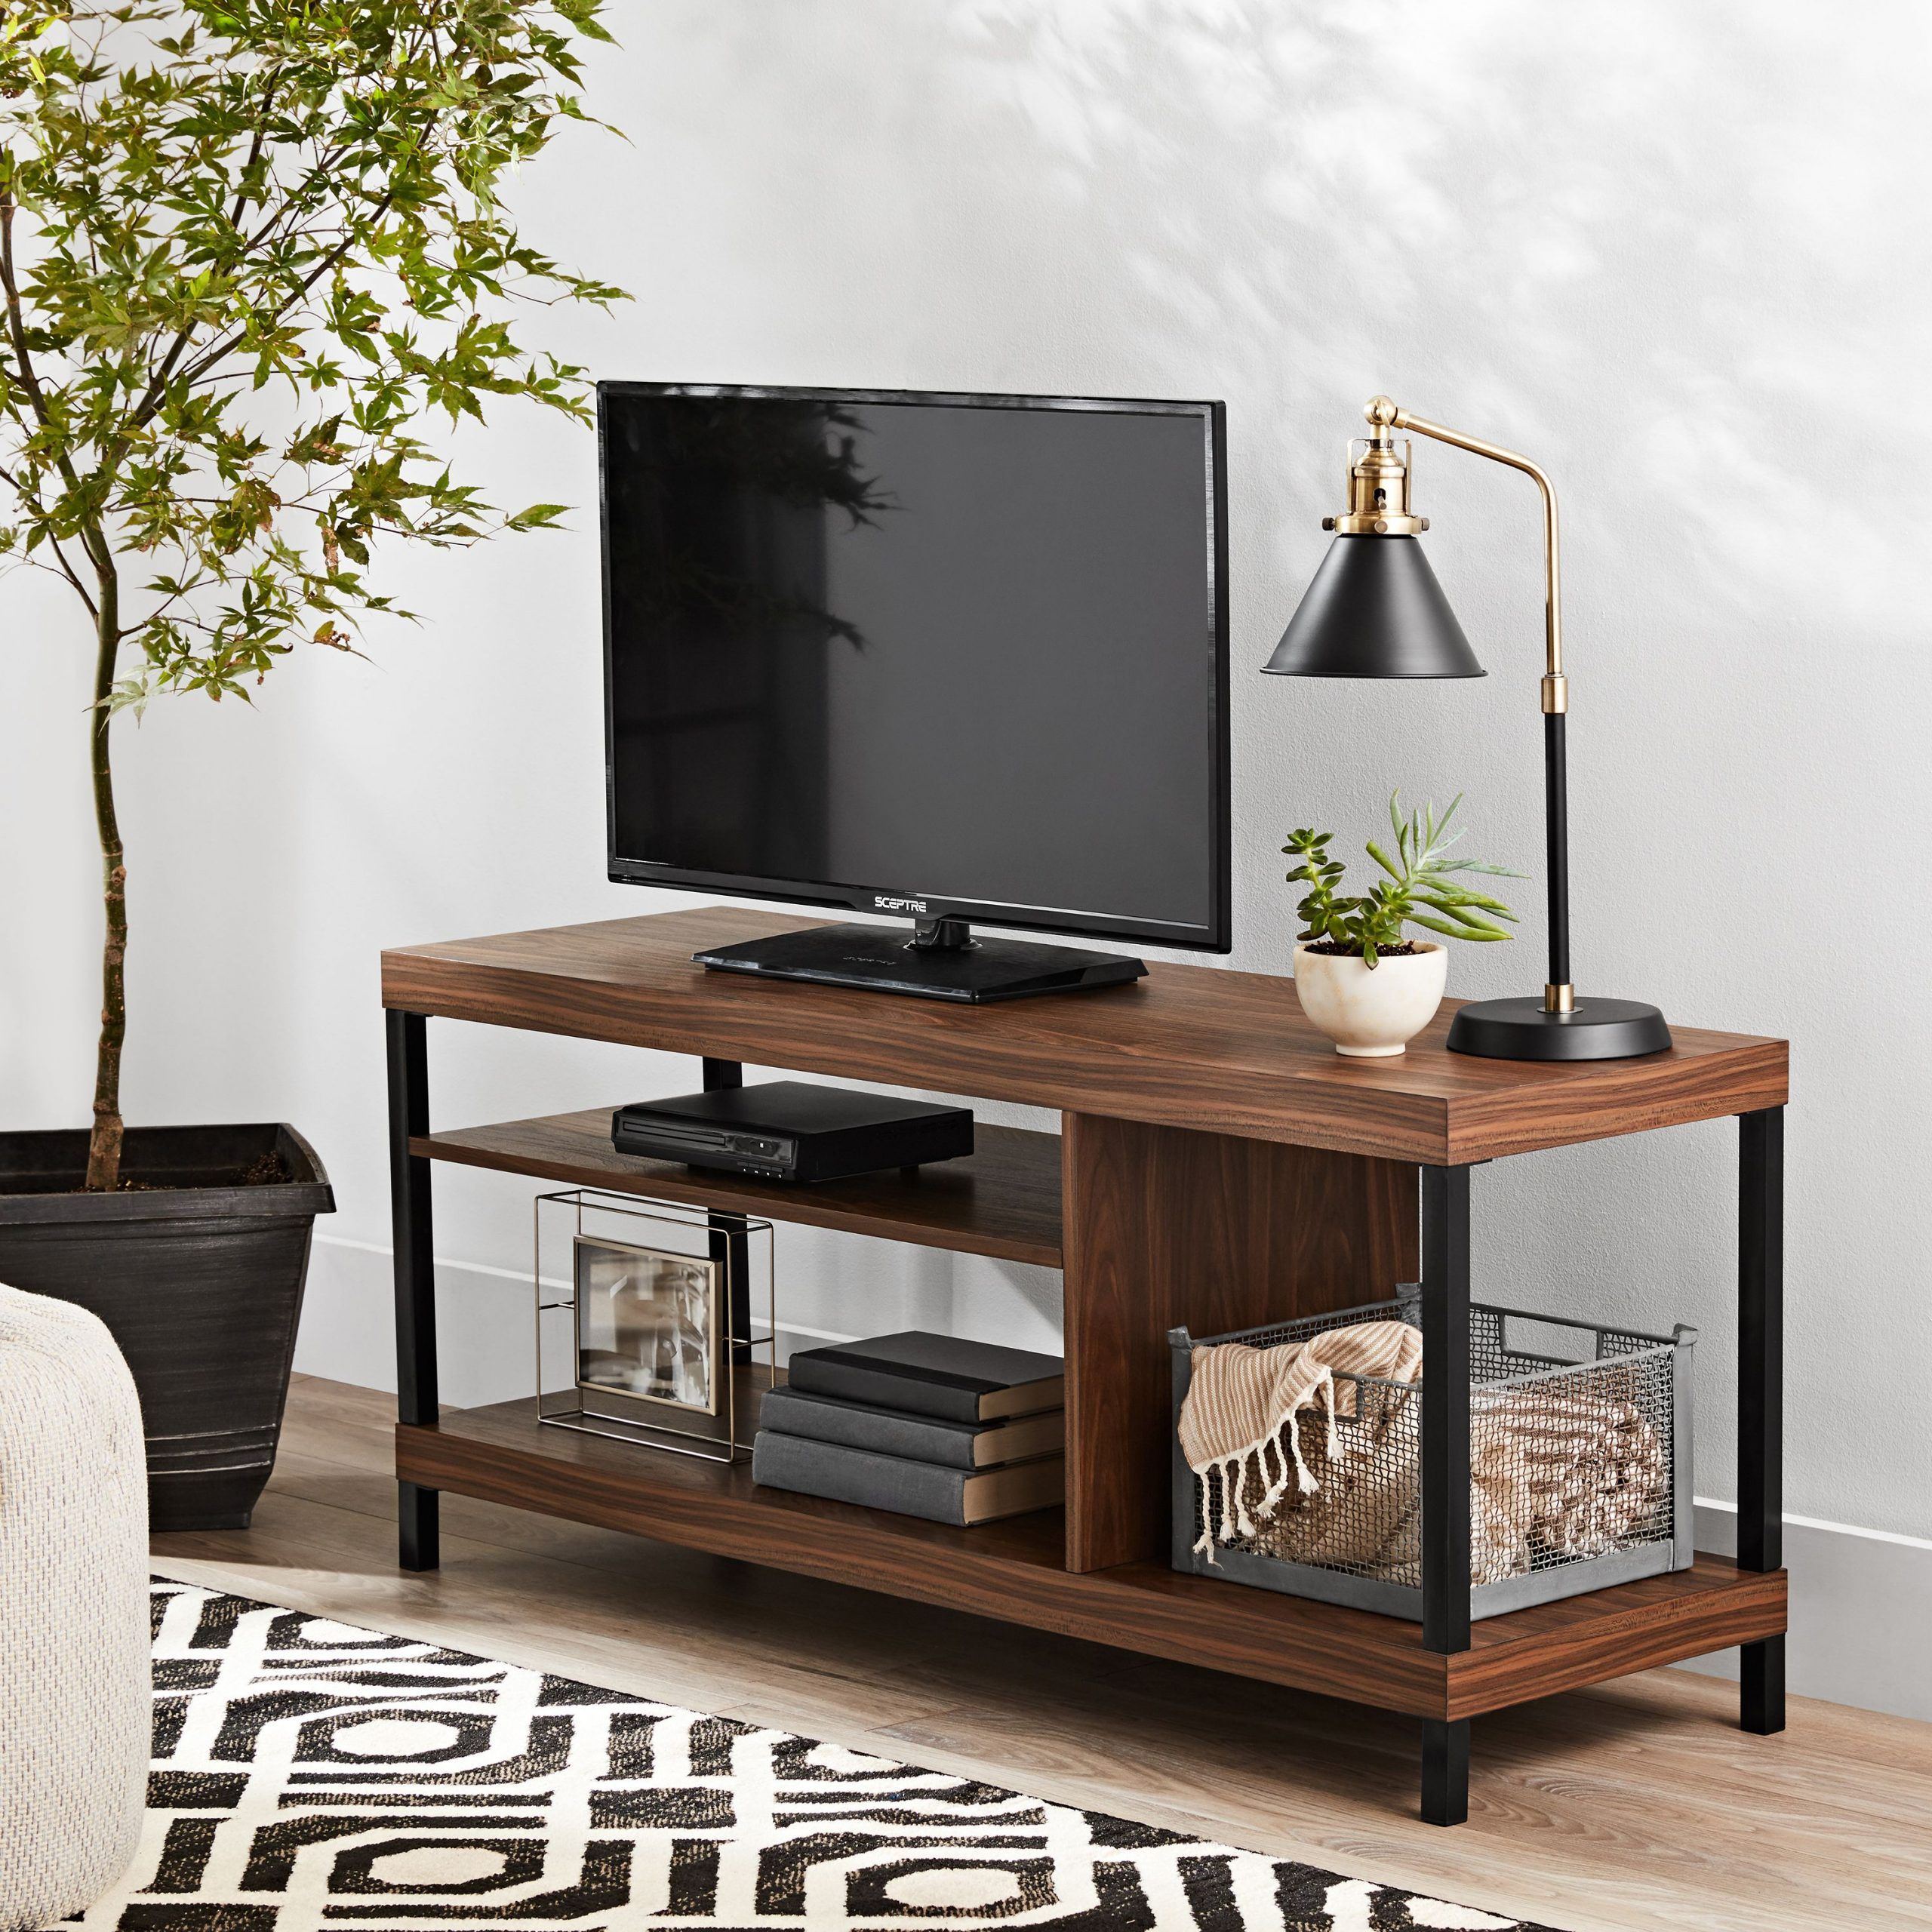 Mainstays Sumpter Park Collection Media Tv Stand For Tvs In Mainstays Parsons Tv Stands With Multiple Finishes (View 8 of 15)